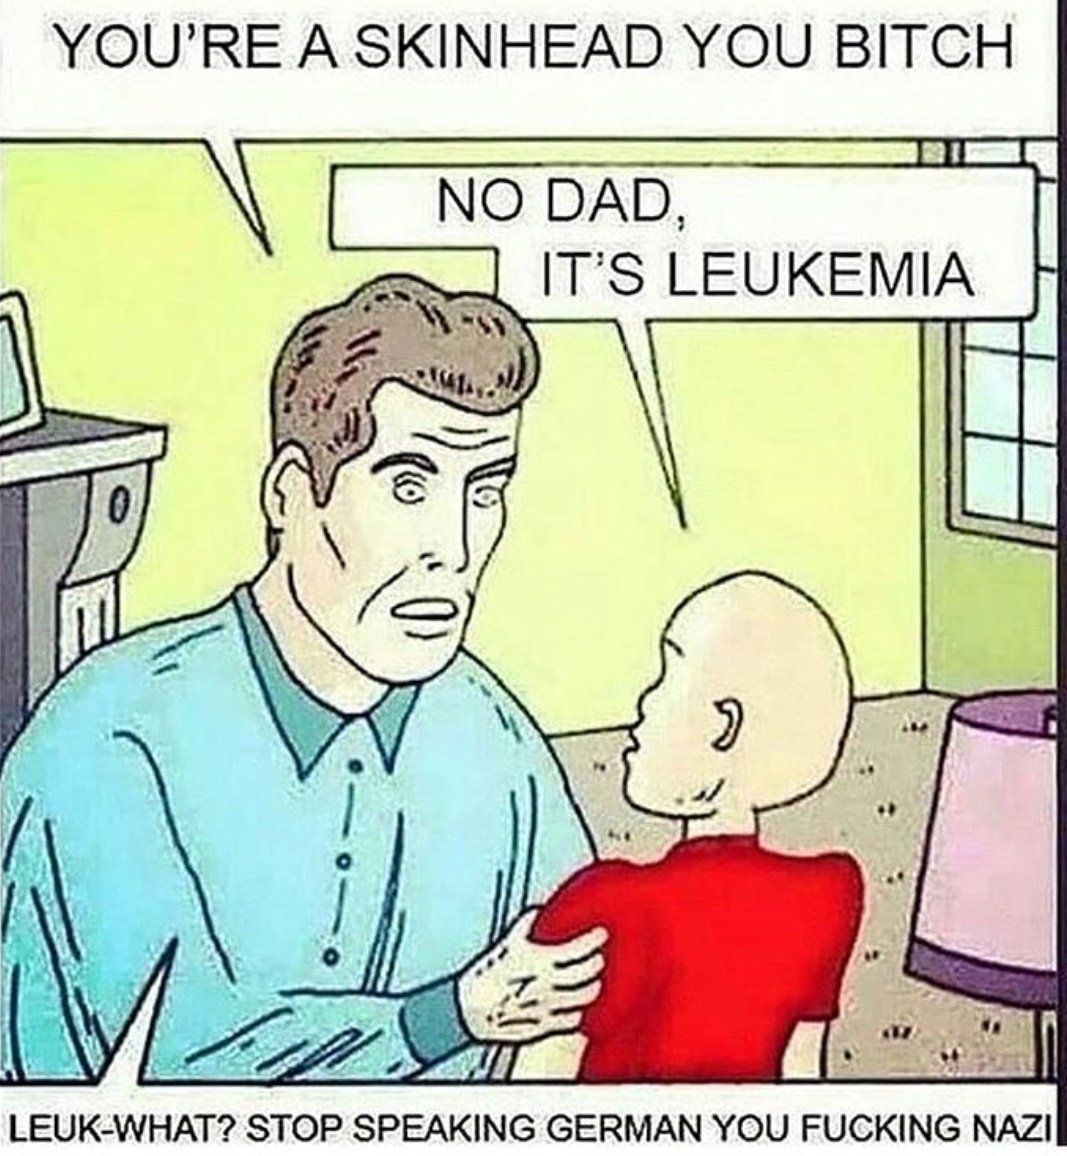 offensive memes - memes not meant for normies - You'Re A Skinhead You Bitch No Dad, It'S Leukemia 0 LeukWhat? Stop Speaking German You Fucking Nazi